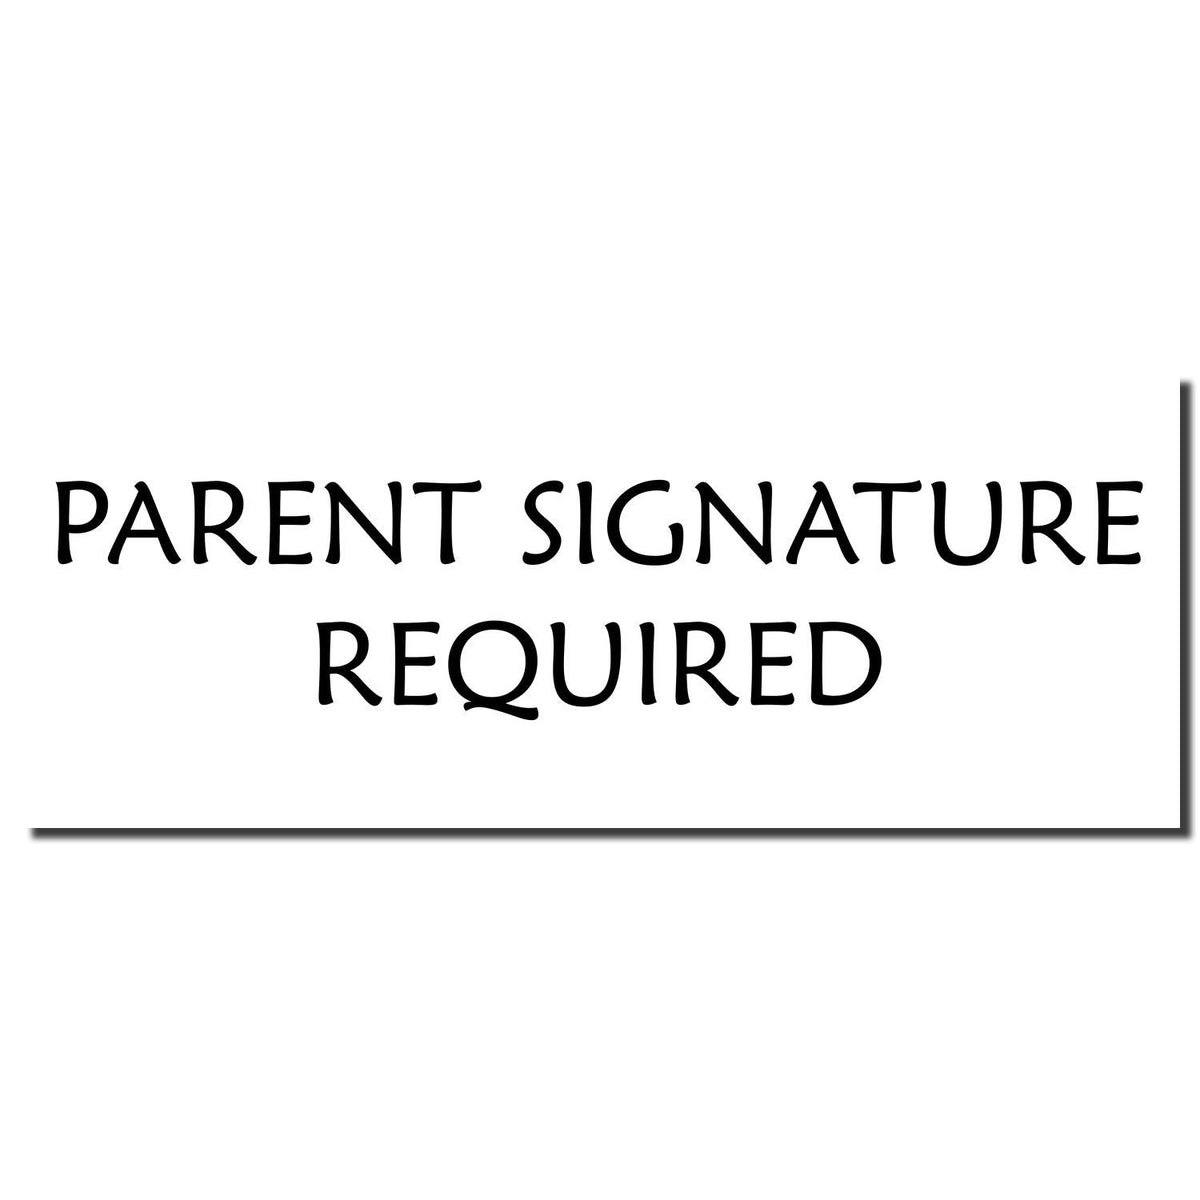 Enlarged Imprint Self Inking Parent Signature Required Stamp Sample